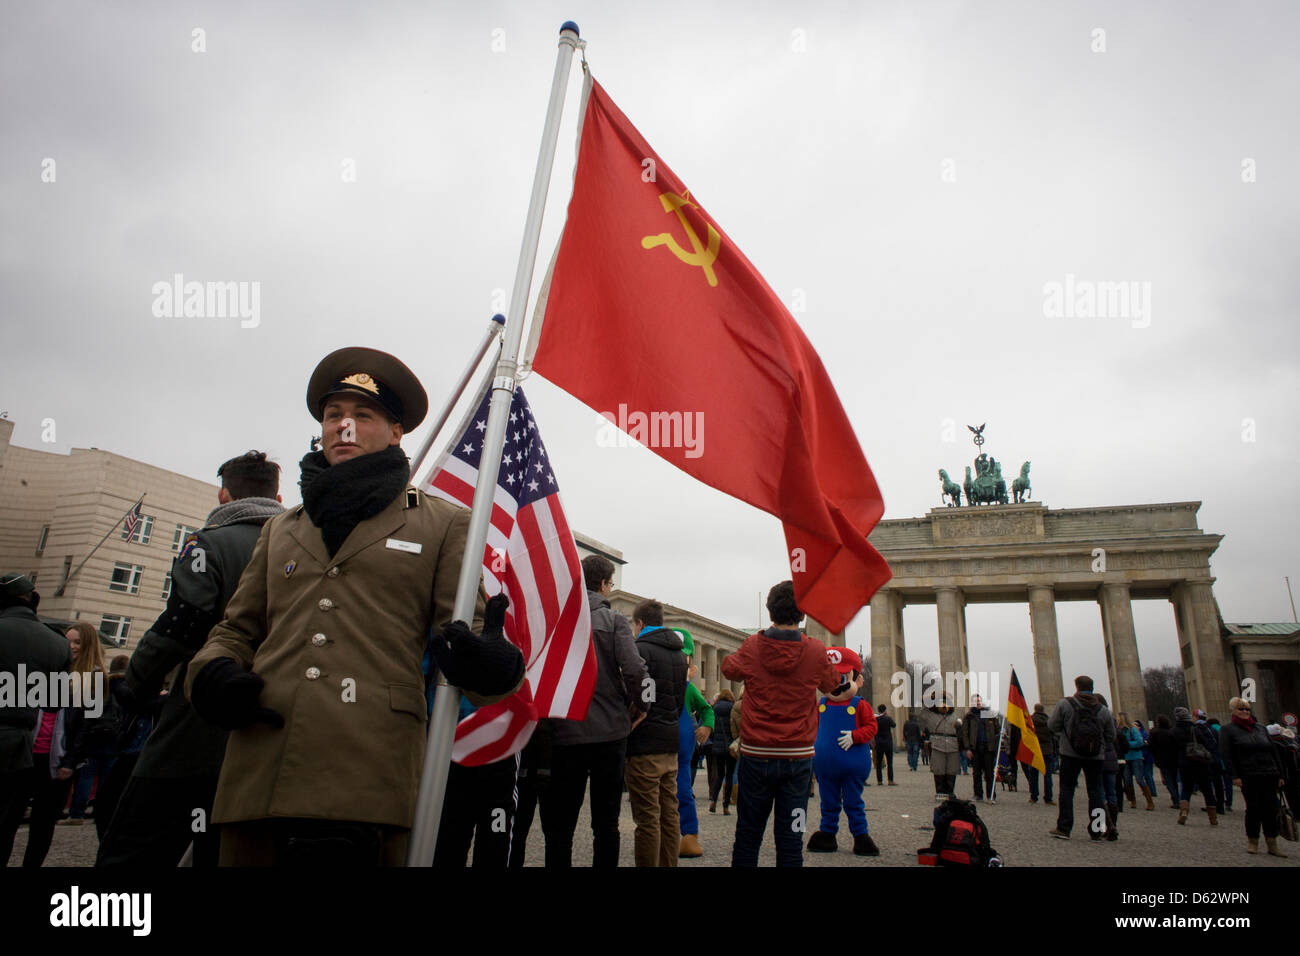 Actors in US and Soviet army uniforms hold flags to recount German history during the second world war and later, the cold war - beneath the Brandenburg Gate in Unter den Linden in central Berlin, Germany. The site is near the former border between Communist East and West Berlin during the Cold War. Here also, Berlin was separated by the occupying sectors of US, British, French and Soviet forces after WW2. (More in Description) .. Stock Photo